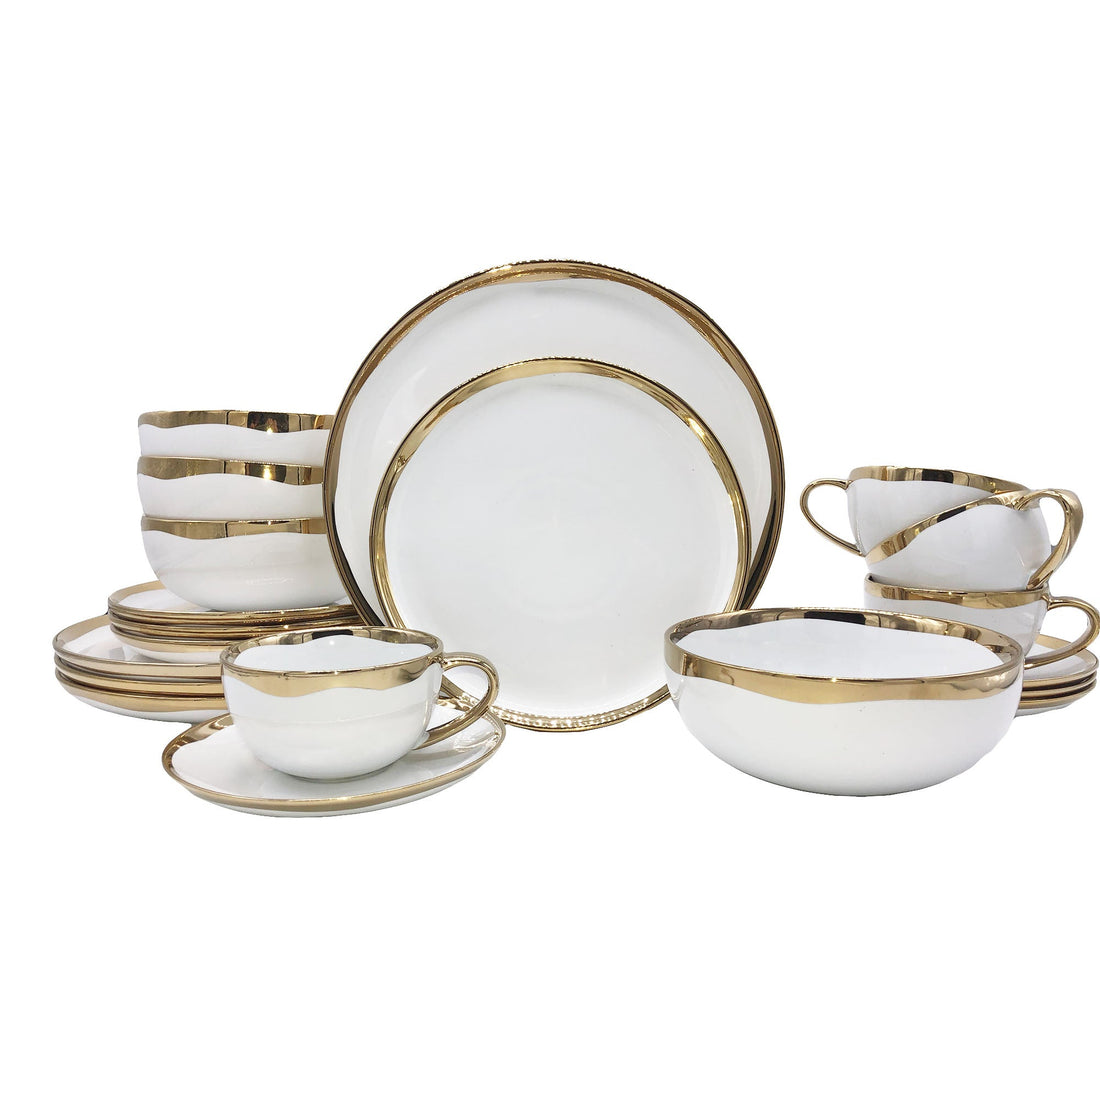 Dauville 20-Piece Service for 4 - Gold